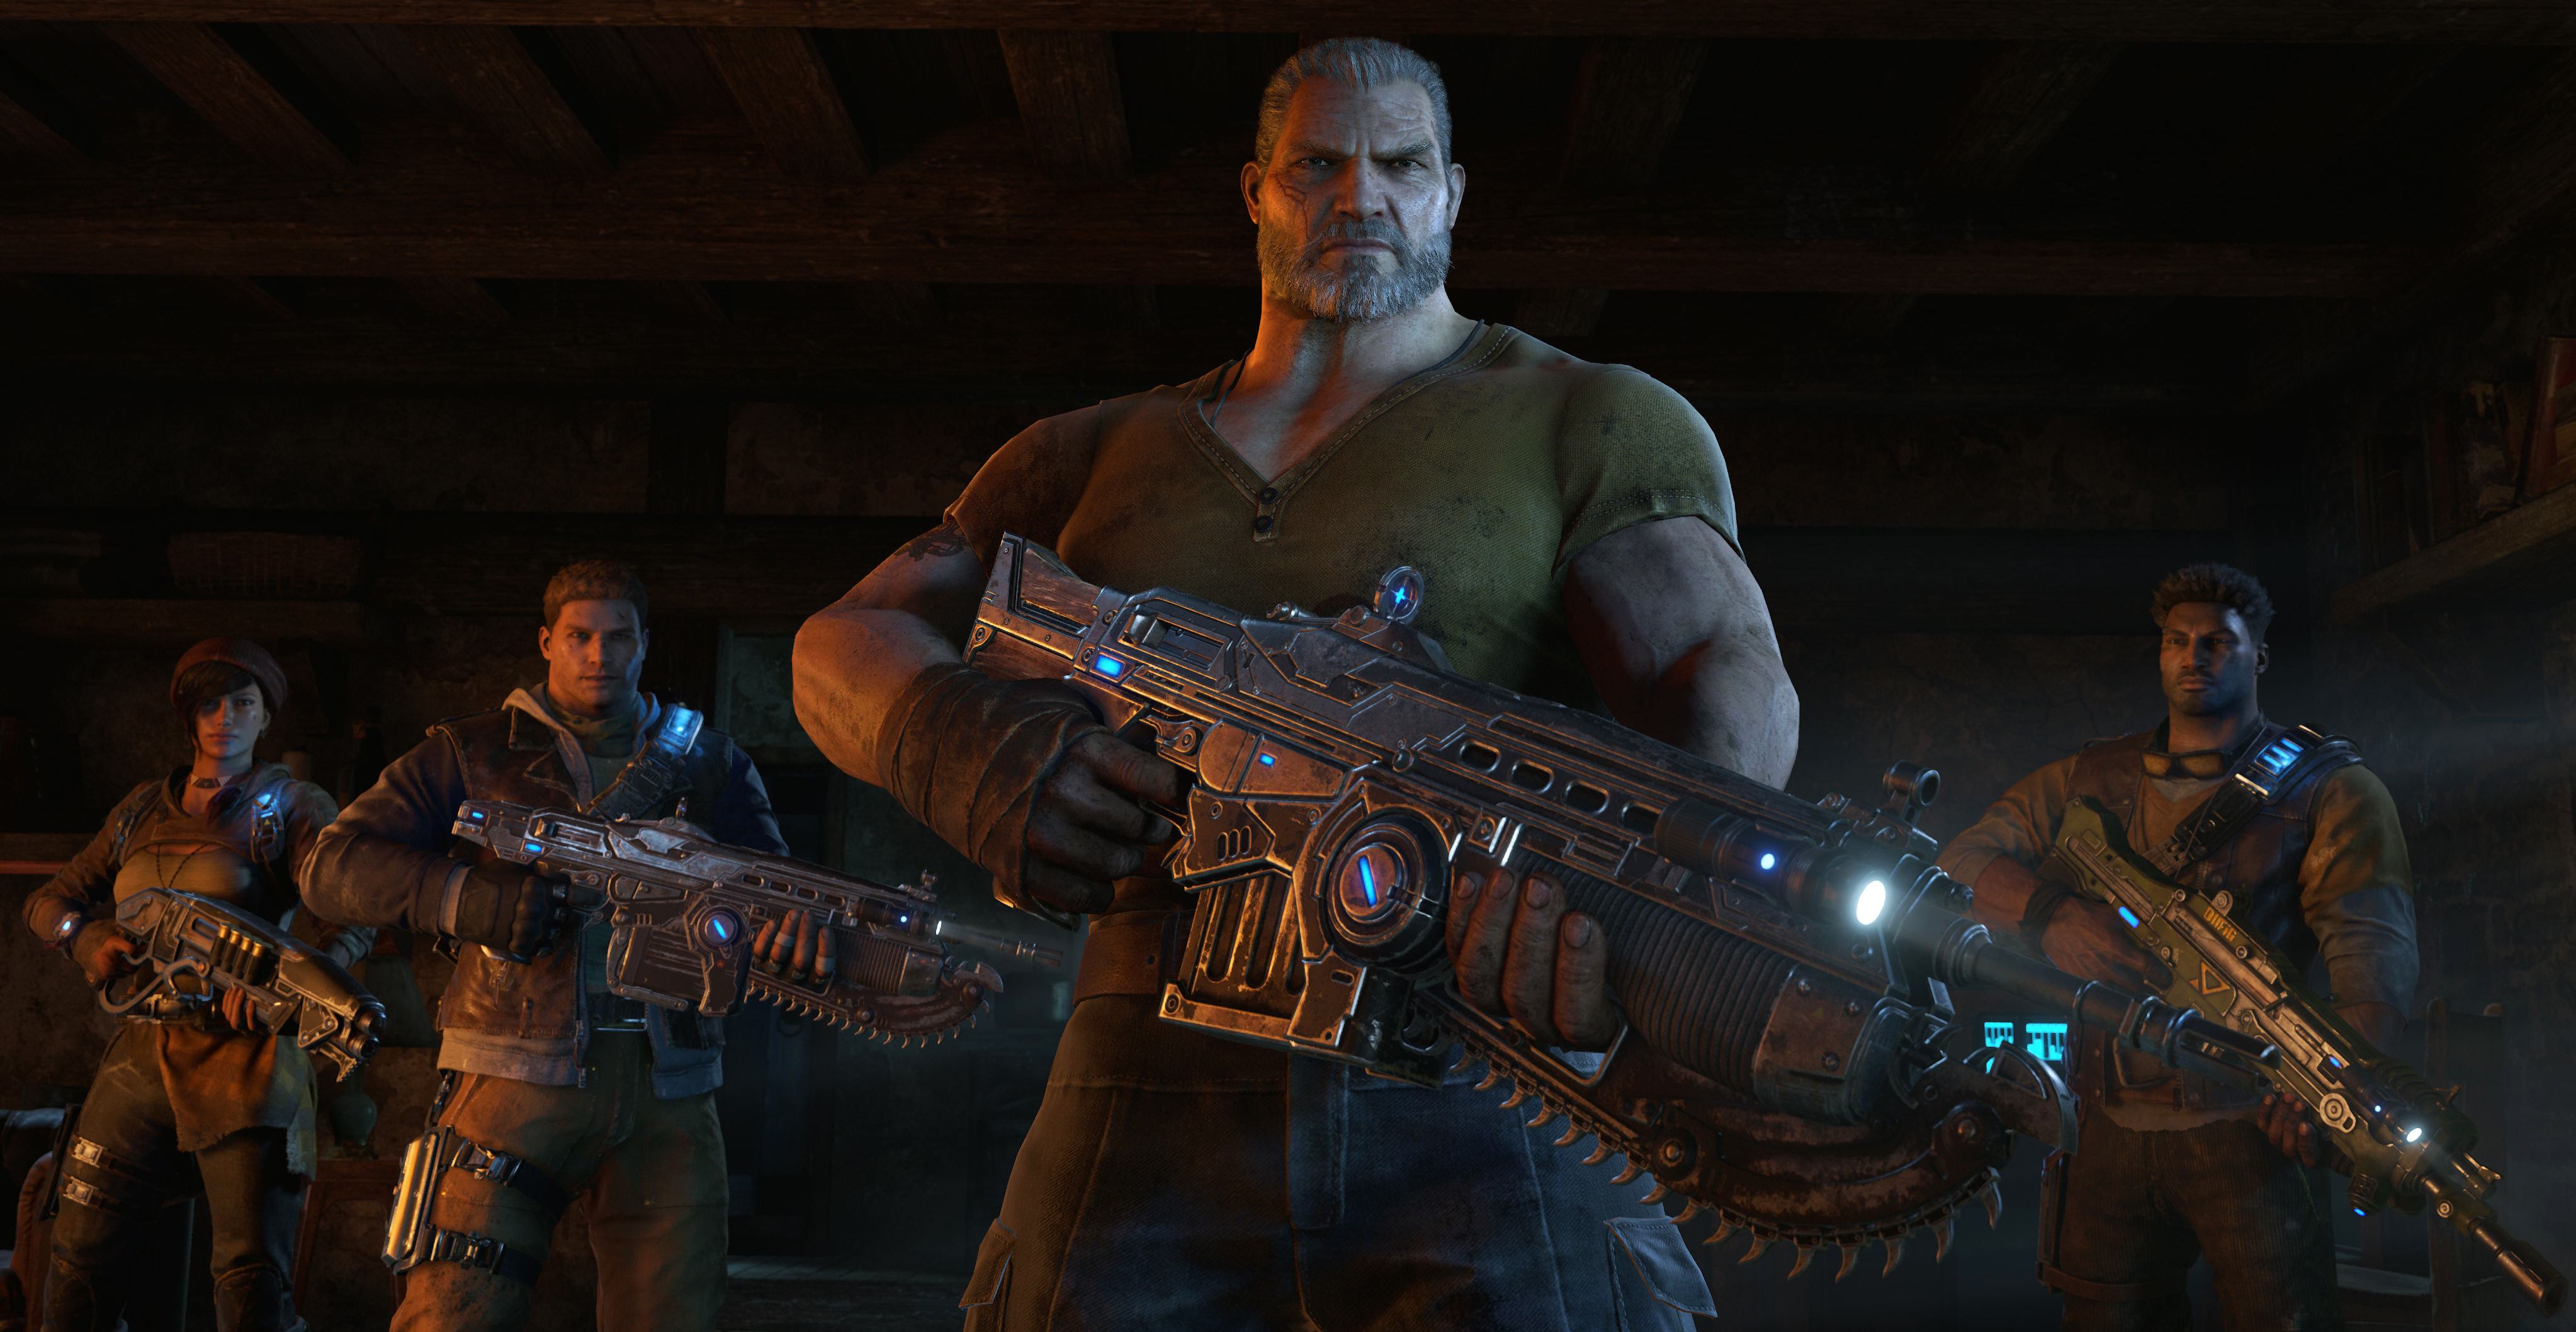 Gears of War 4 - PC Gameplay - Max Settings 